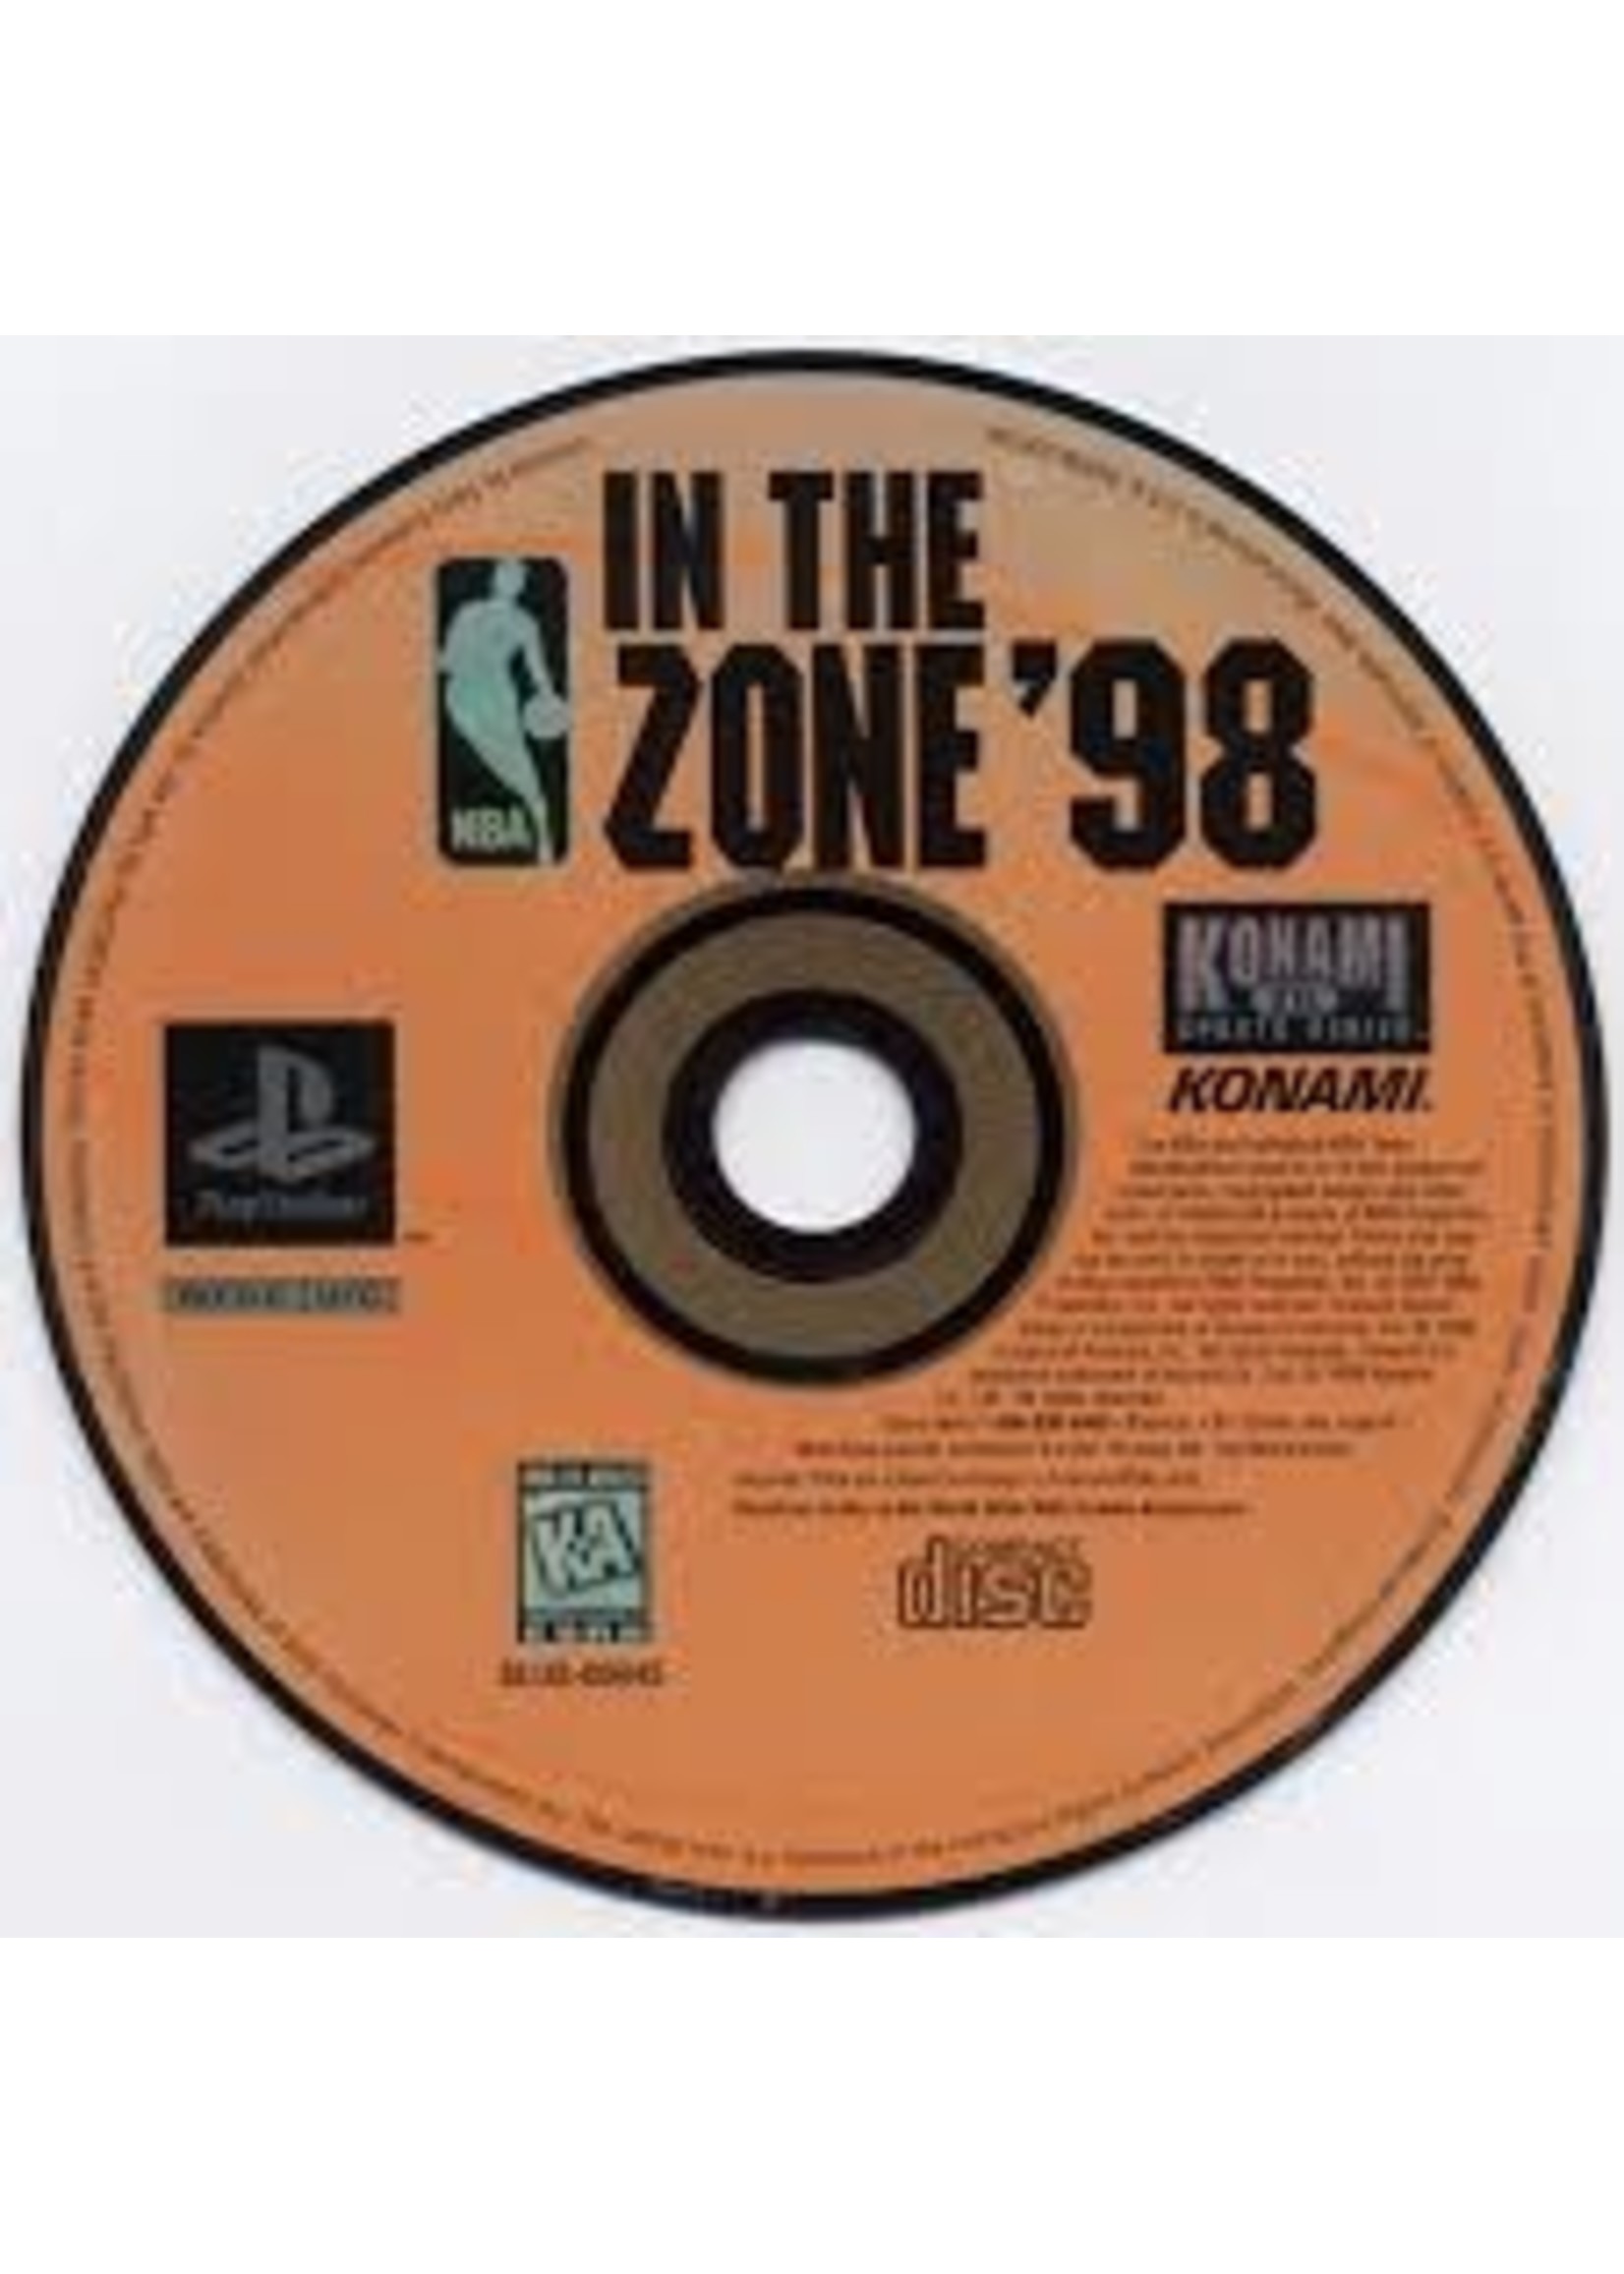 Sony Playstation 1 (PS1) NBA in the Zone '98 - Print